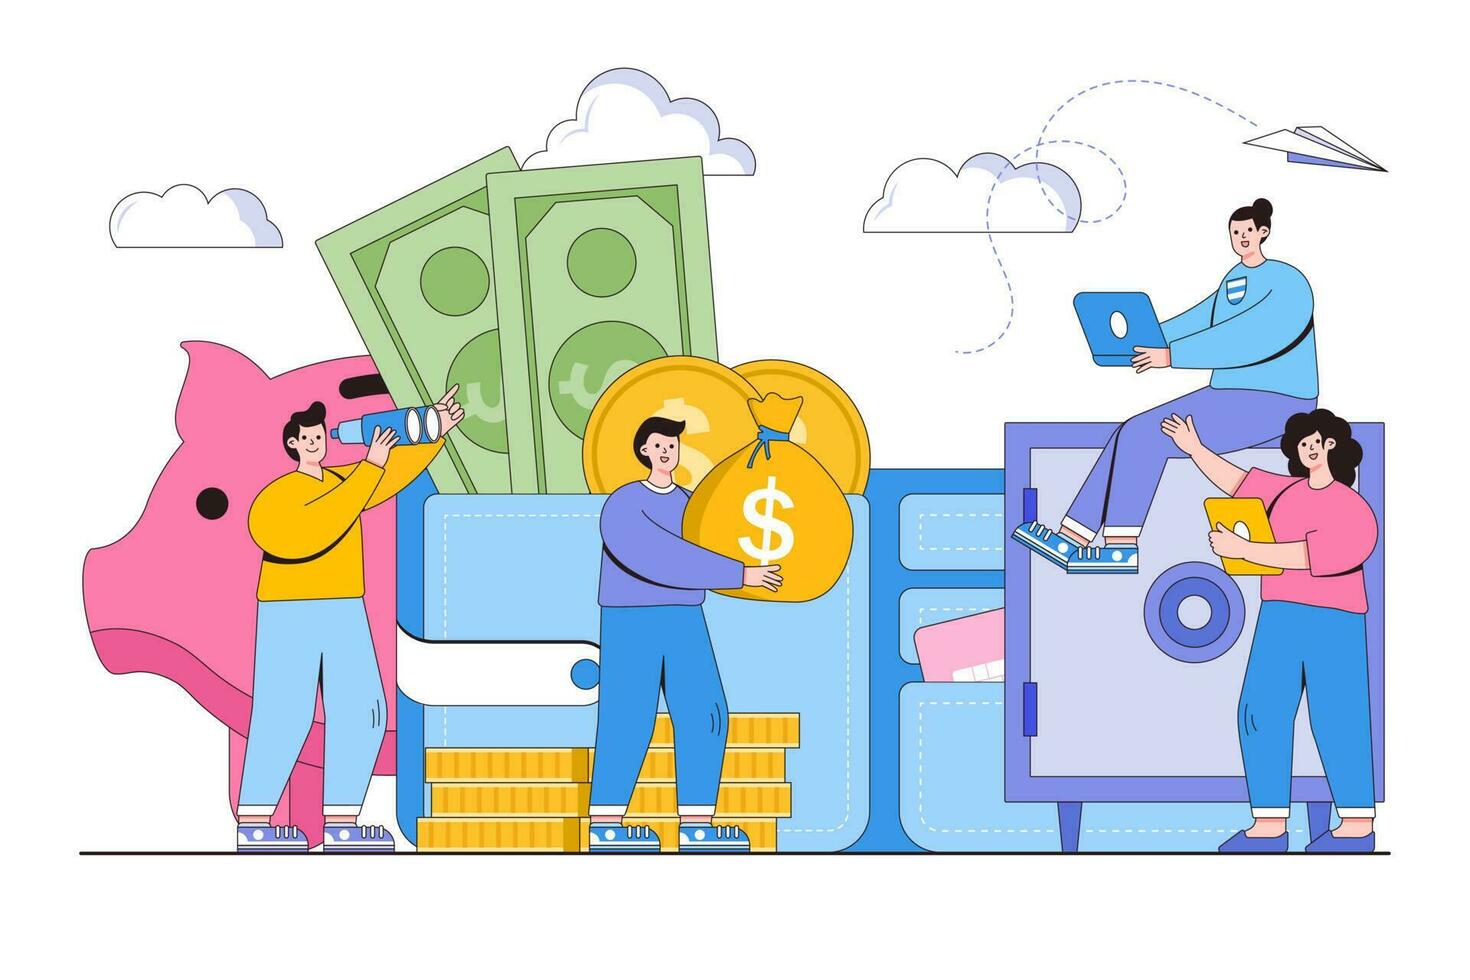 Vector illustration of saving or accumulating money with large piggy bank, open purse, brankas and people characters